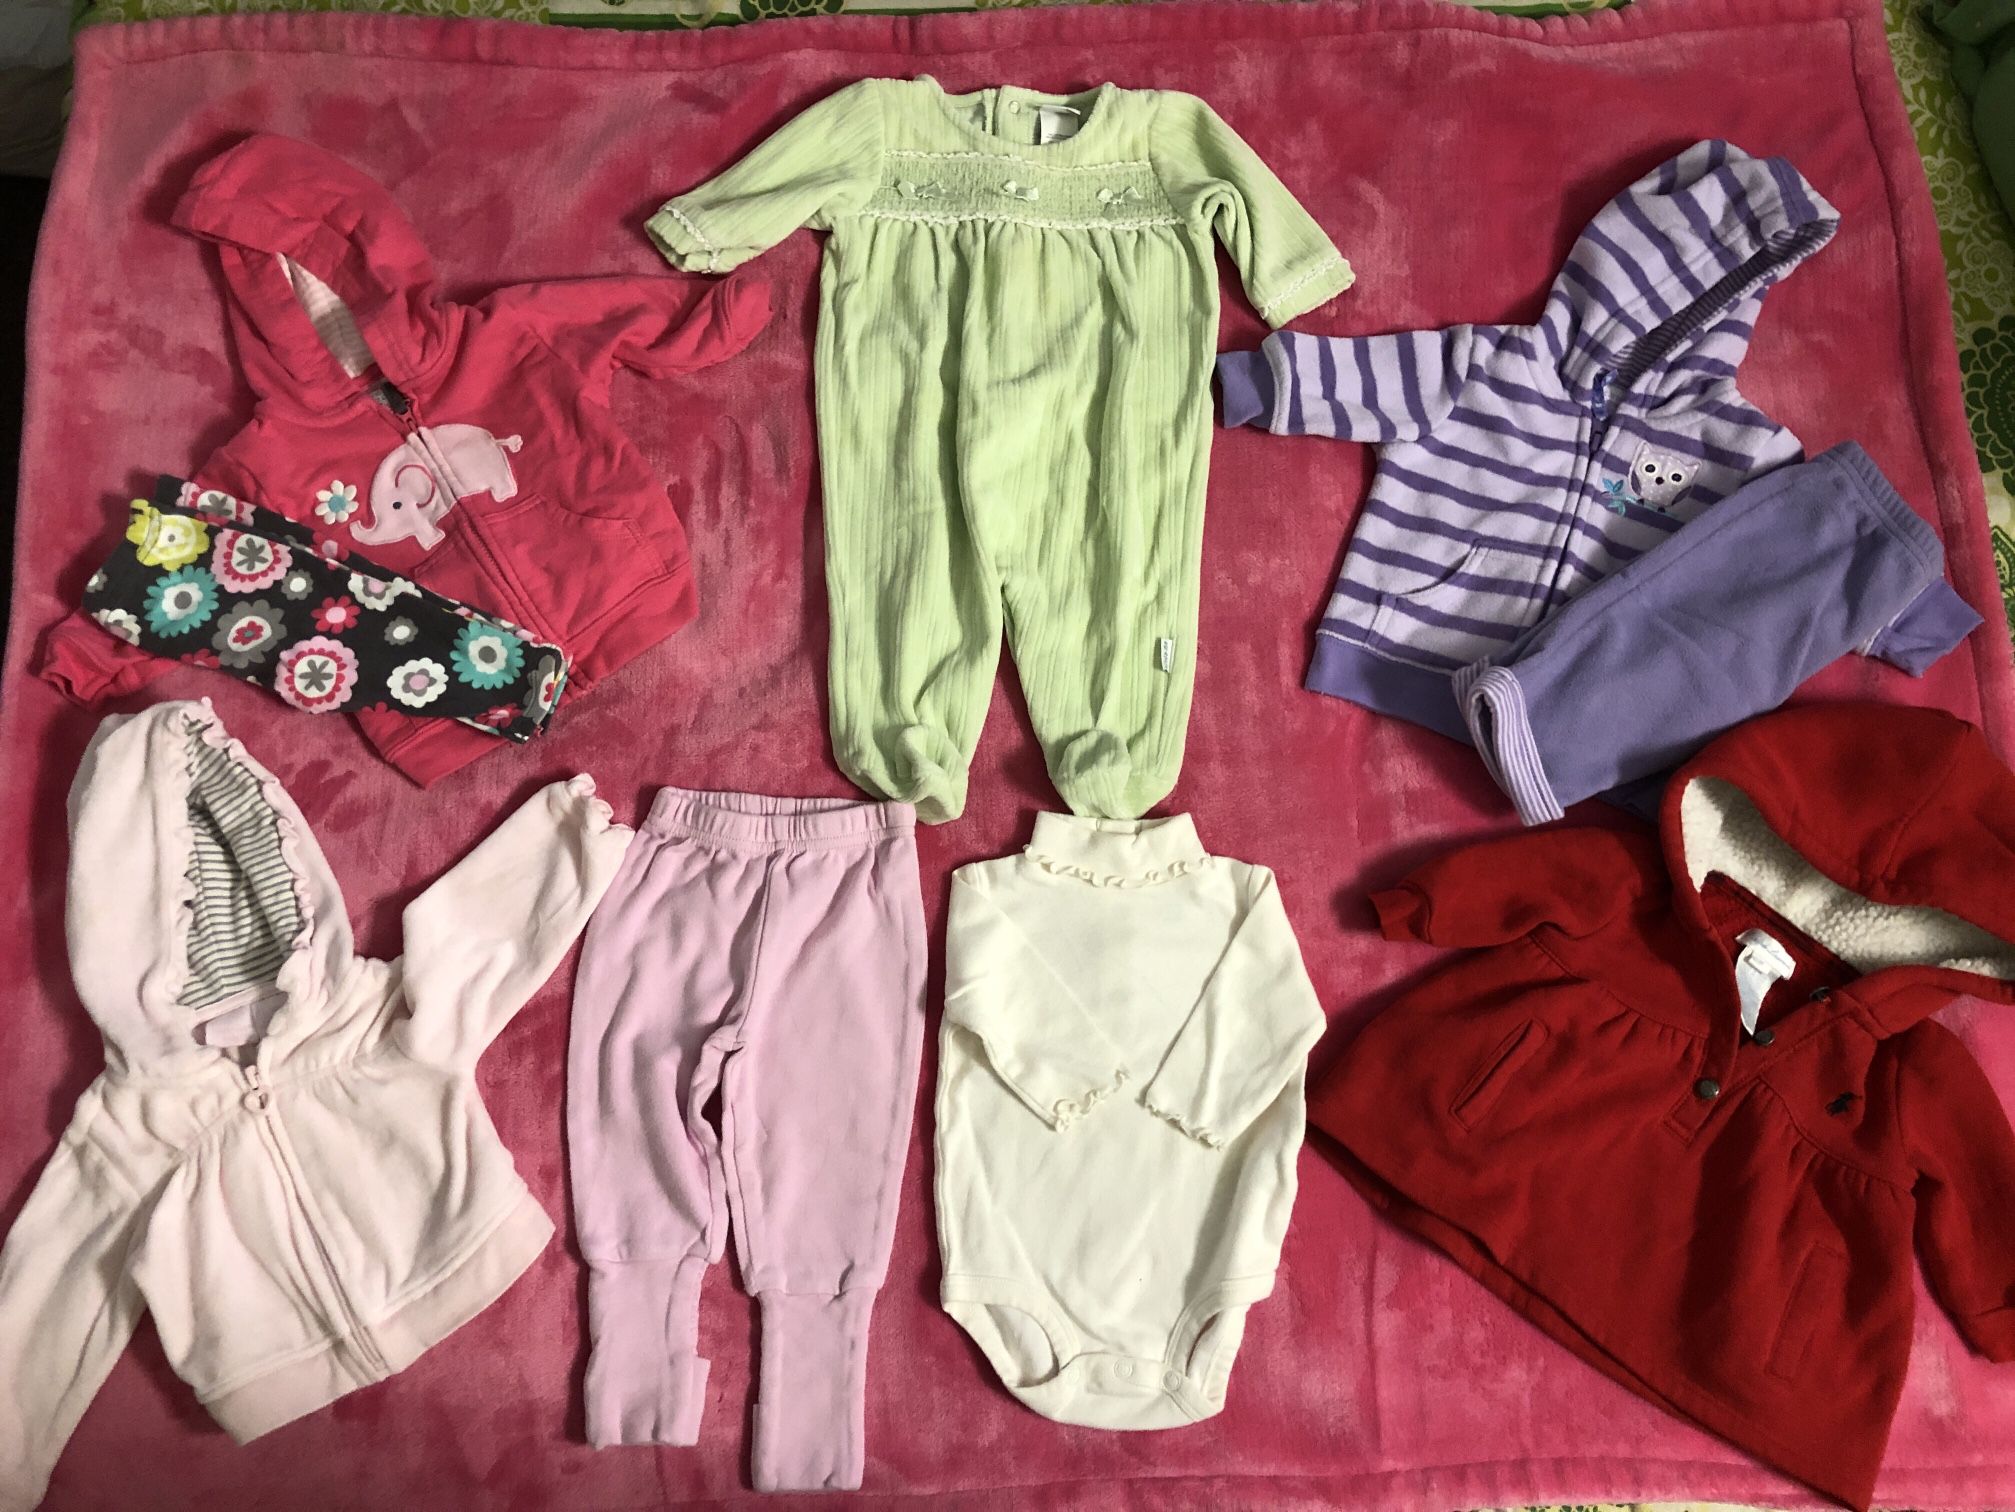 1 Lot of Girls Fall/Winter Baby Clothes Sizes 3 Mo, 3-6 Mo , & 6 Mo. Some Brand Names.